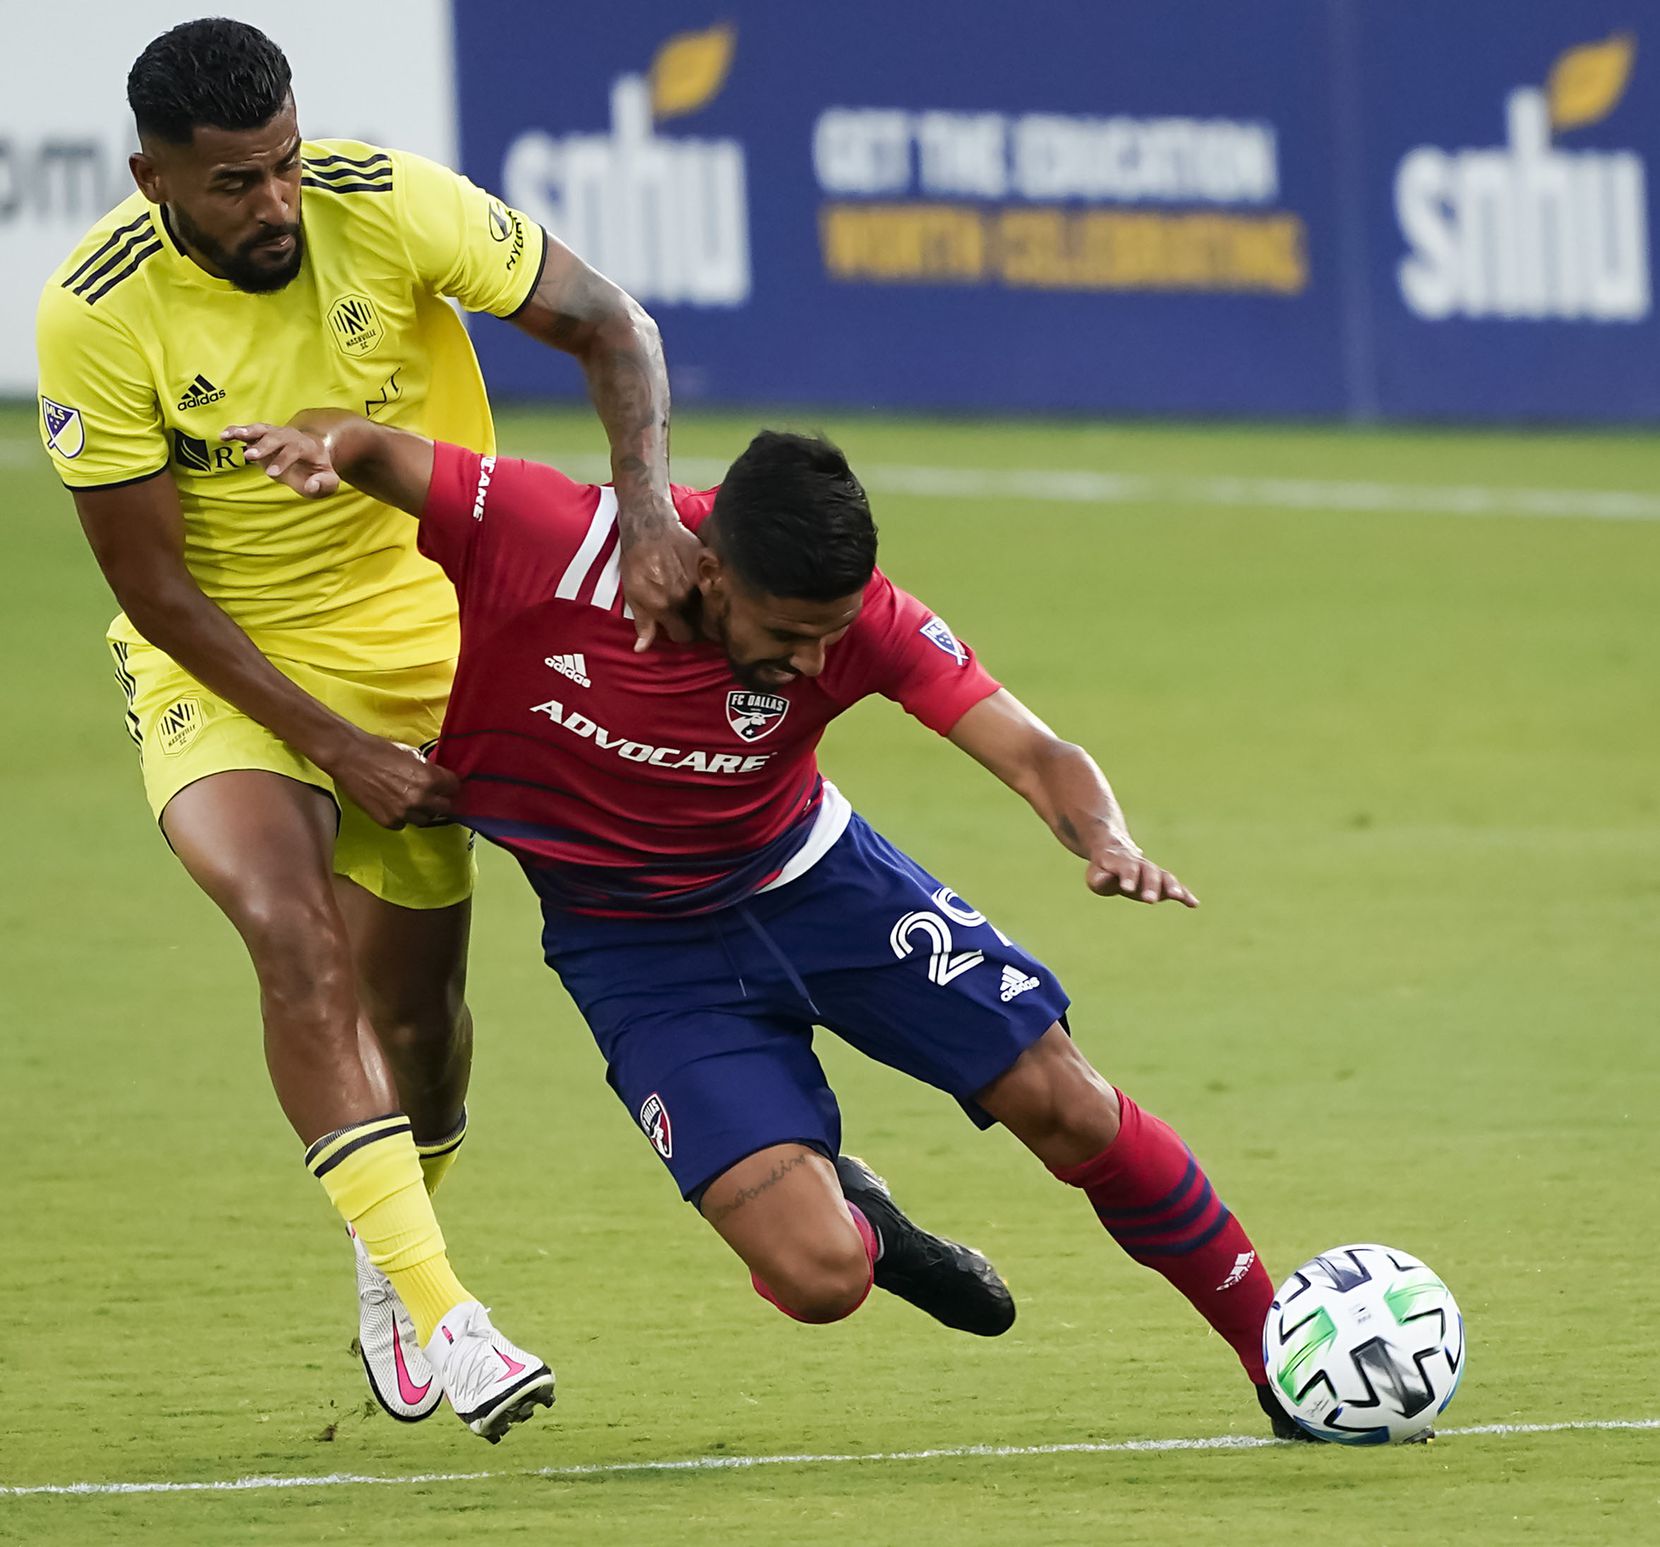 FC Dallas forward Franco Jara (29) is pulled down by Nashville SC midfielder Anibal Godoy (20) during the first half of an MLS soccer game at Toyota Stadium on Wednesday, Aug. 12, 2020, in Frisco, Texas. (Smiley N. Pool/The Dallas Morning News)